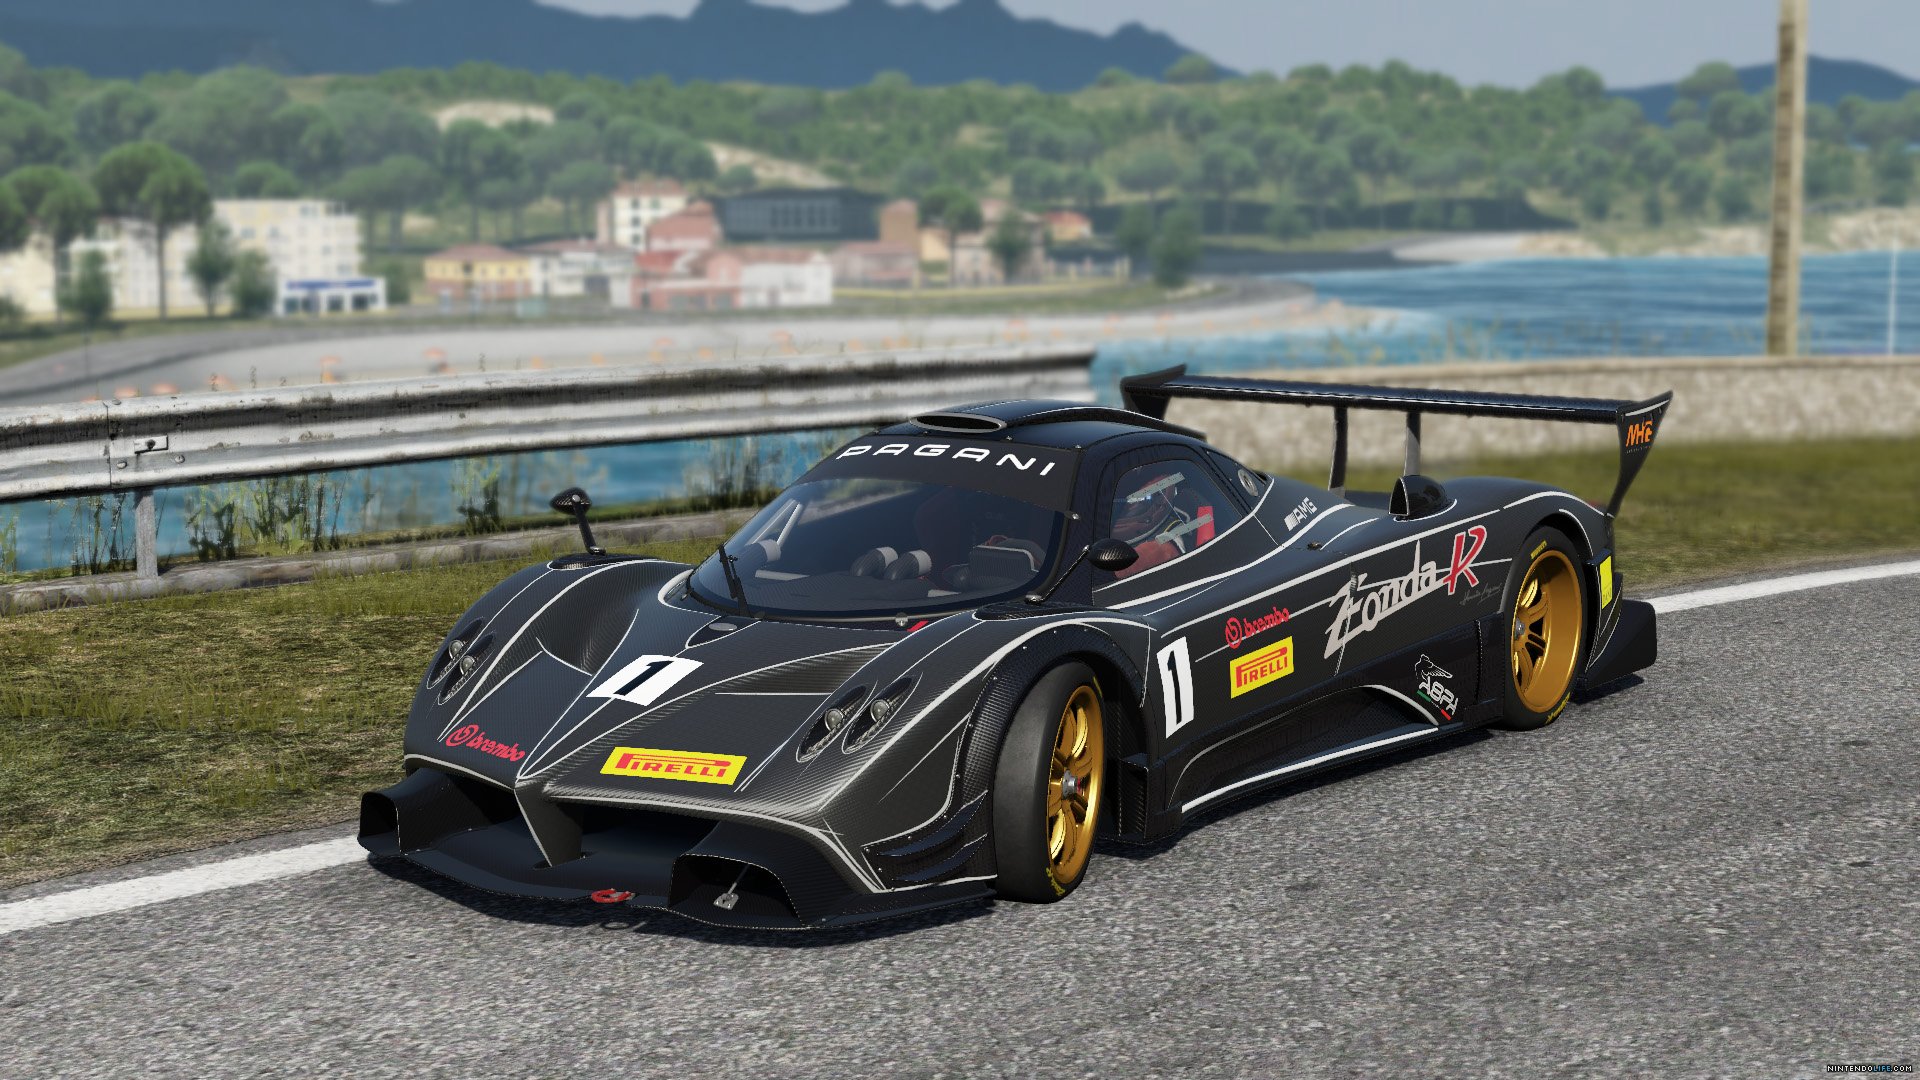 “Project CARS” Cancelled for Wii U - 